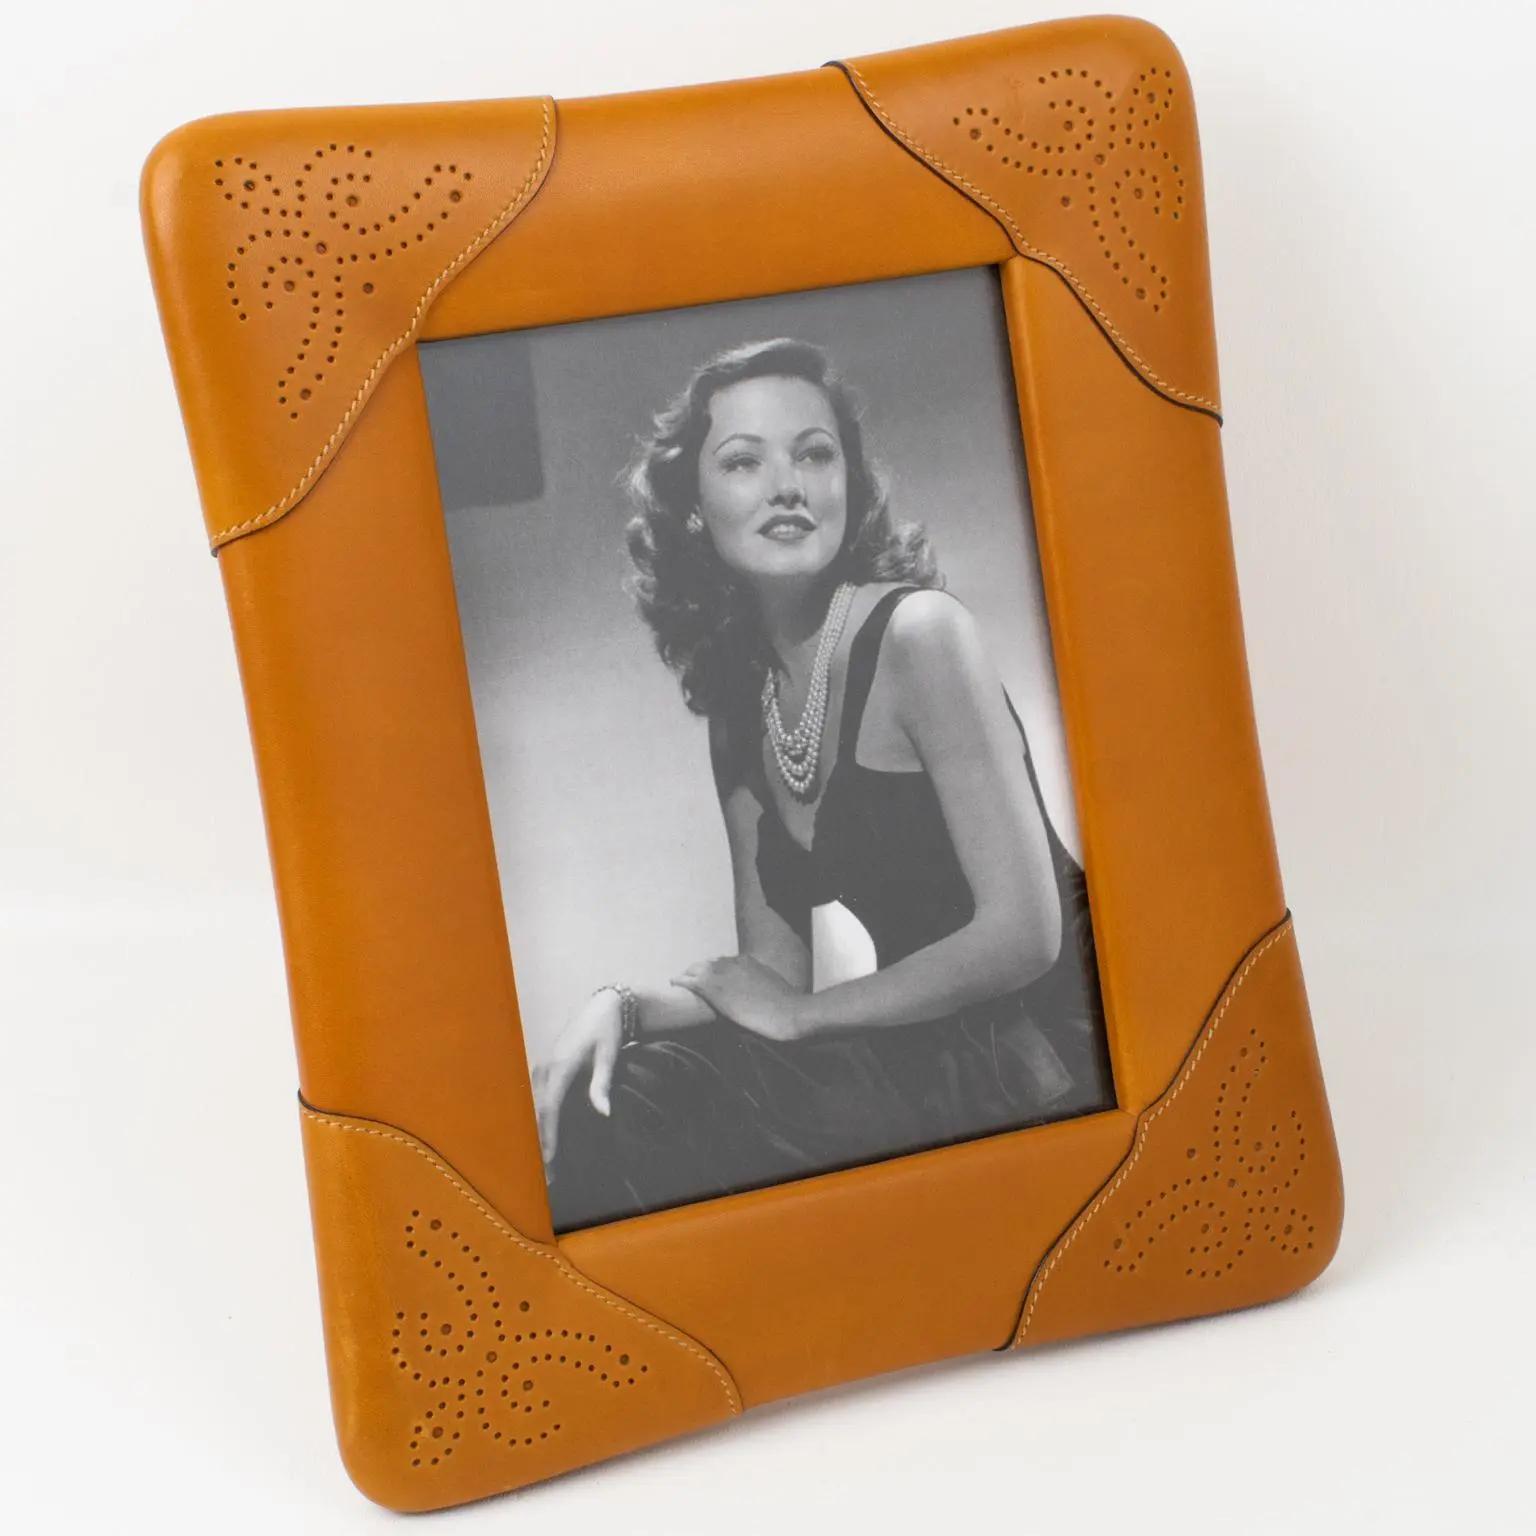 Add luxury to your interior with this Picture photo frame created by Italian designer Gucci. The timeless and elegant gold cognac calfskin leather has a textured pattern with ornate hand-stitched and pierced decor. The back and easel are in the same